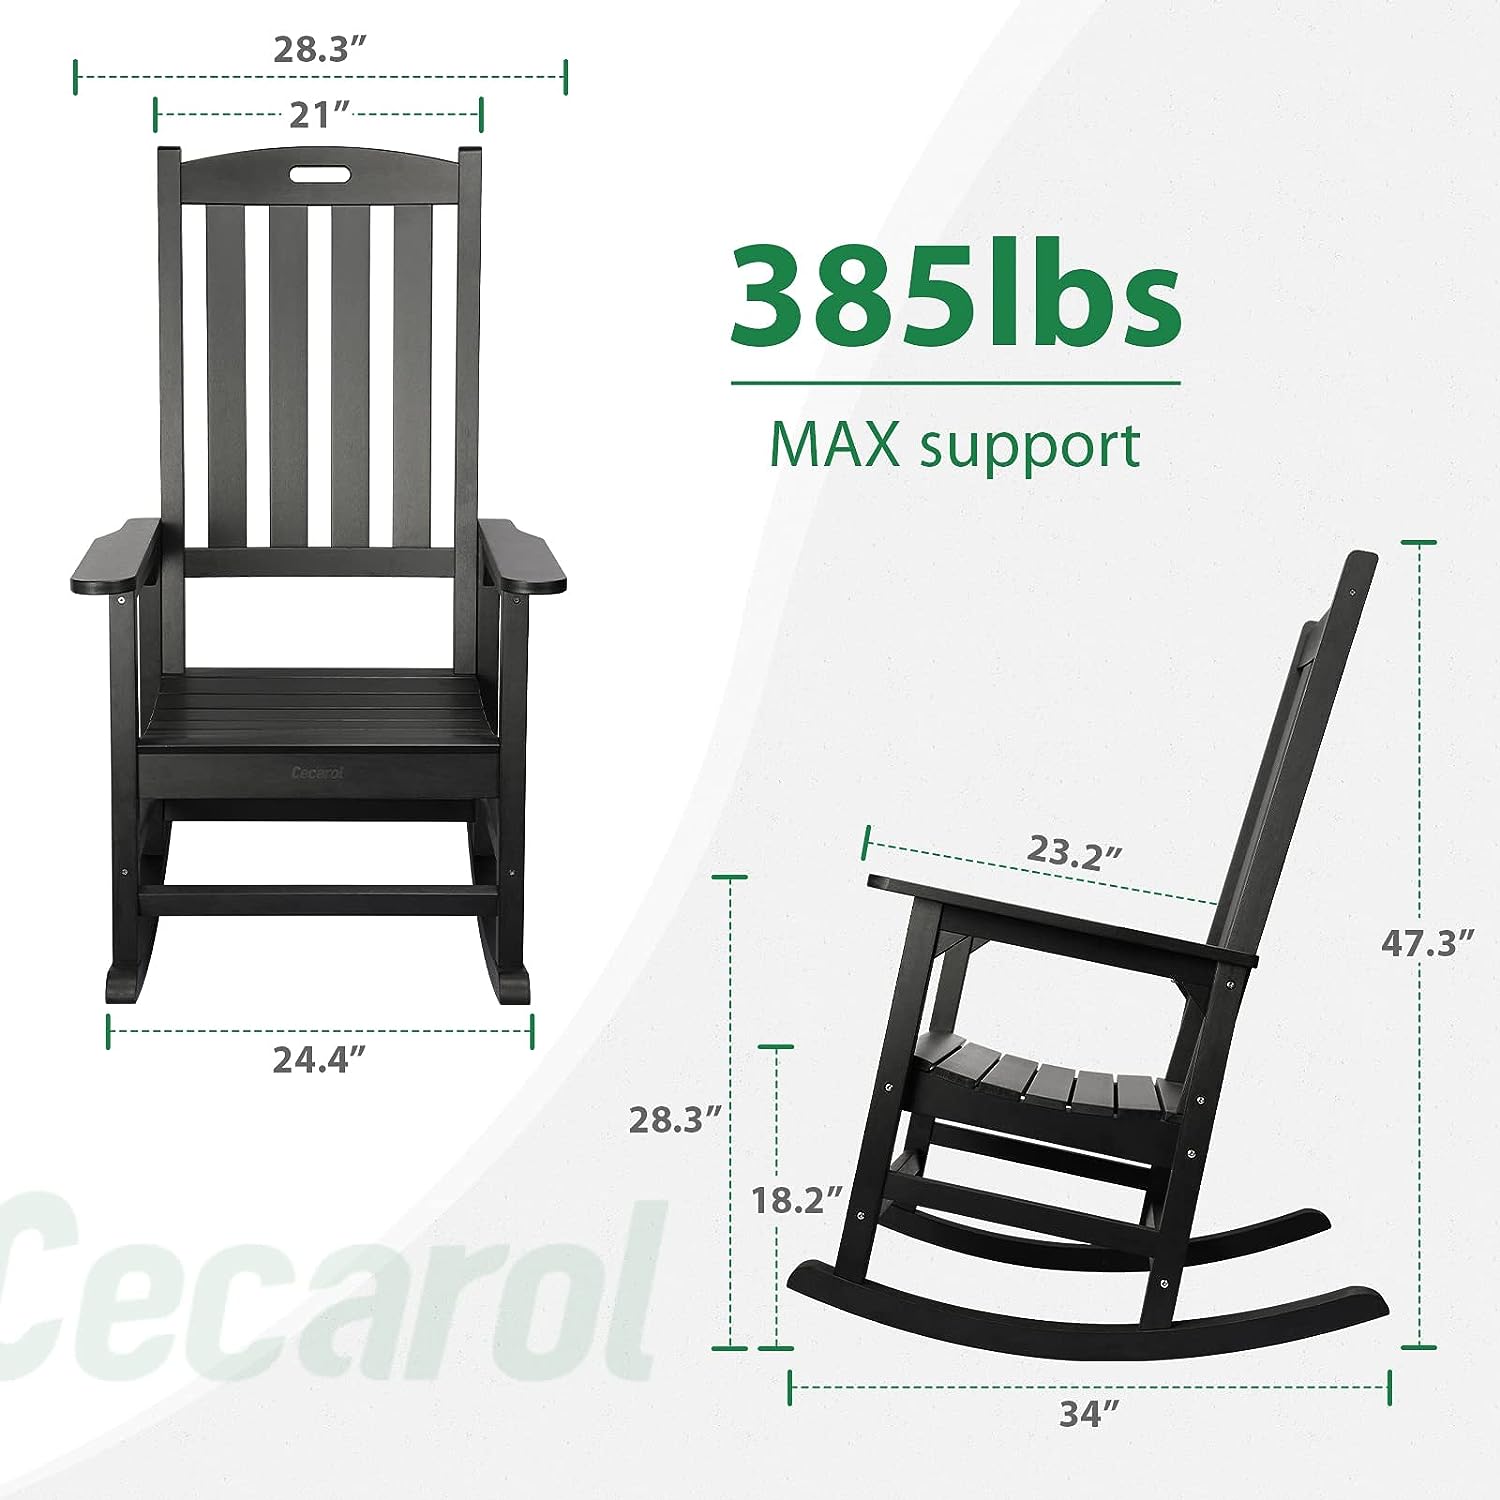 https://bigbigmart.com/wp-content/uploads/2023/08/Cecarol-Patio-Oversized-Rocking-Chair-Outdoor-Weather-Resistant-Low-Maintenance-High-Back-Front-Porch-Rocker-Chairs-385lbs-Support-Poly-Lumber-Rocker.-1.jpg